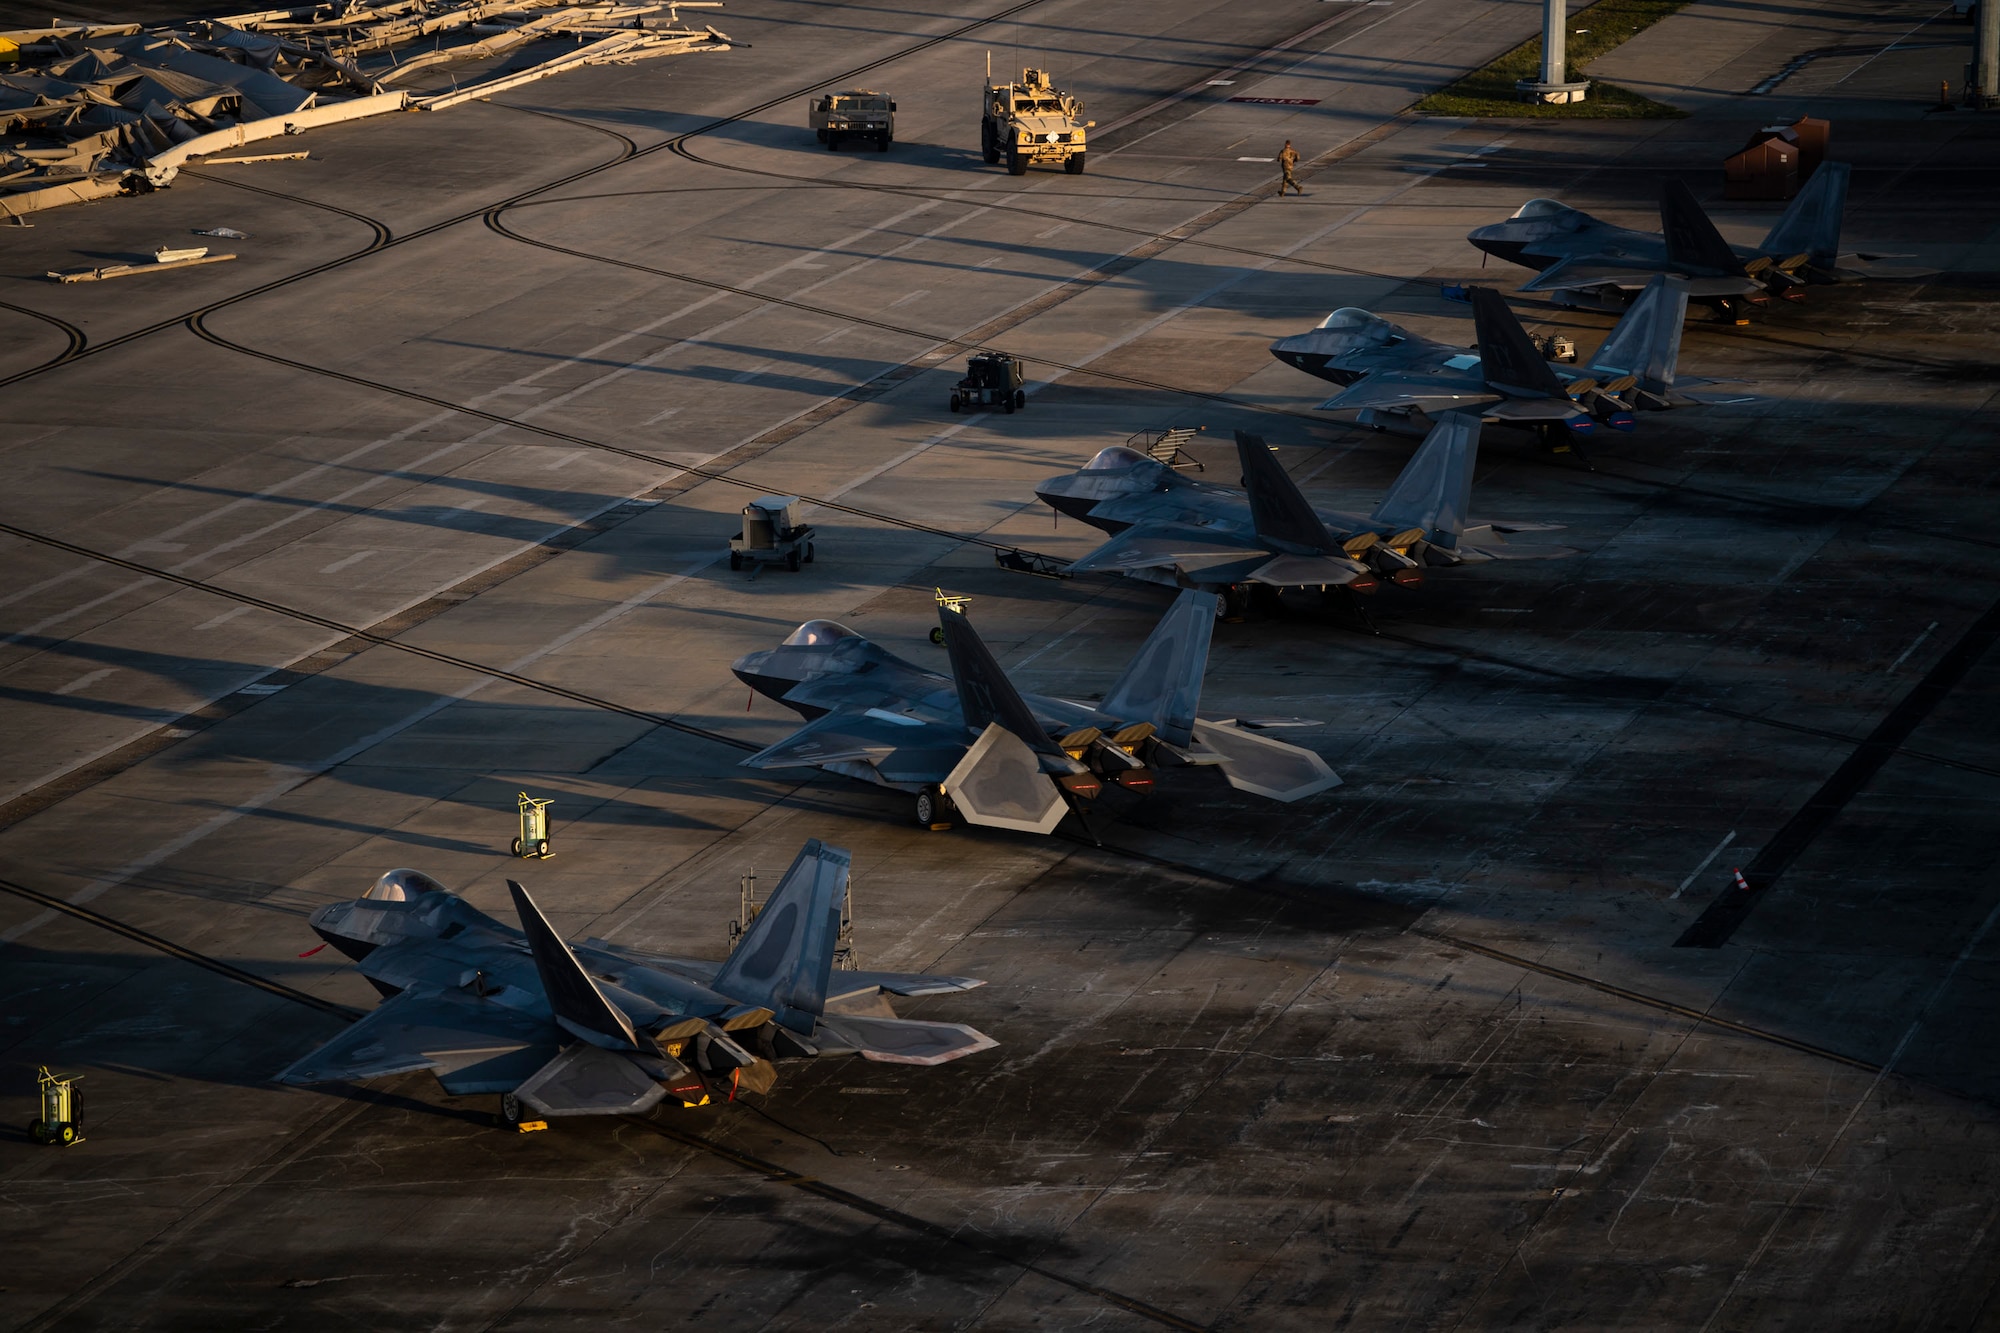 F-22 Raptors are parked near the runway at Tyndall Air Force Base, Florida, Oct. 15, 2018. Air Combat Command has mobilized multiple relief assets in an effort to restore operations after the hurricane caused catastrophic damage to the base. (U.S. Air Force photo by Master Sgt. Russ Scalf)